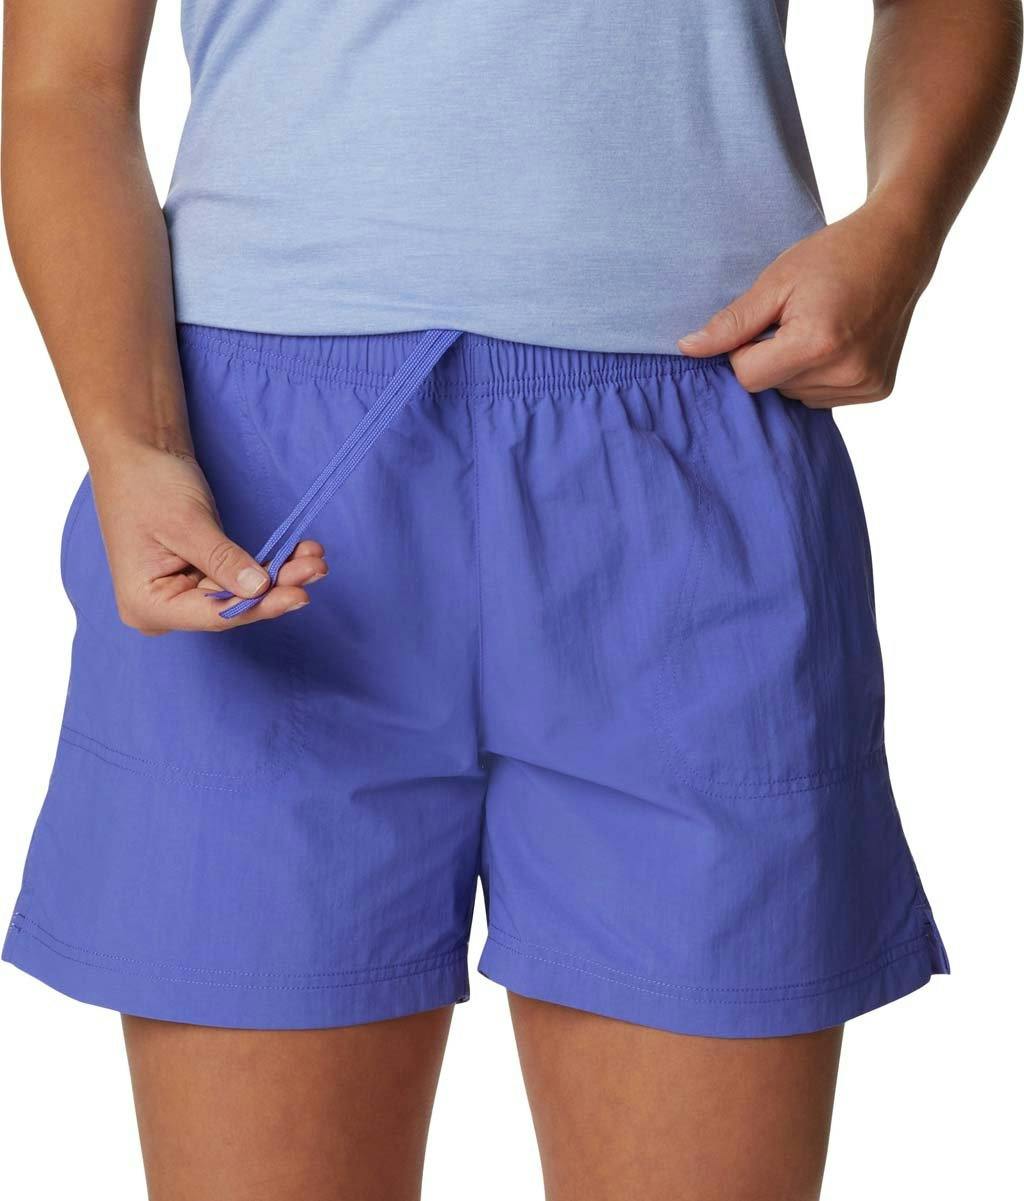 Product image for Sandy River Shorts - Women's